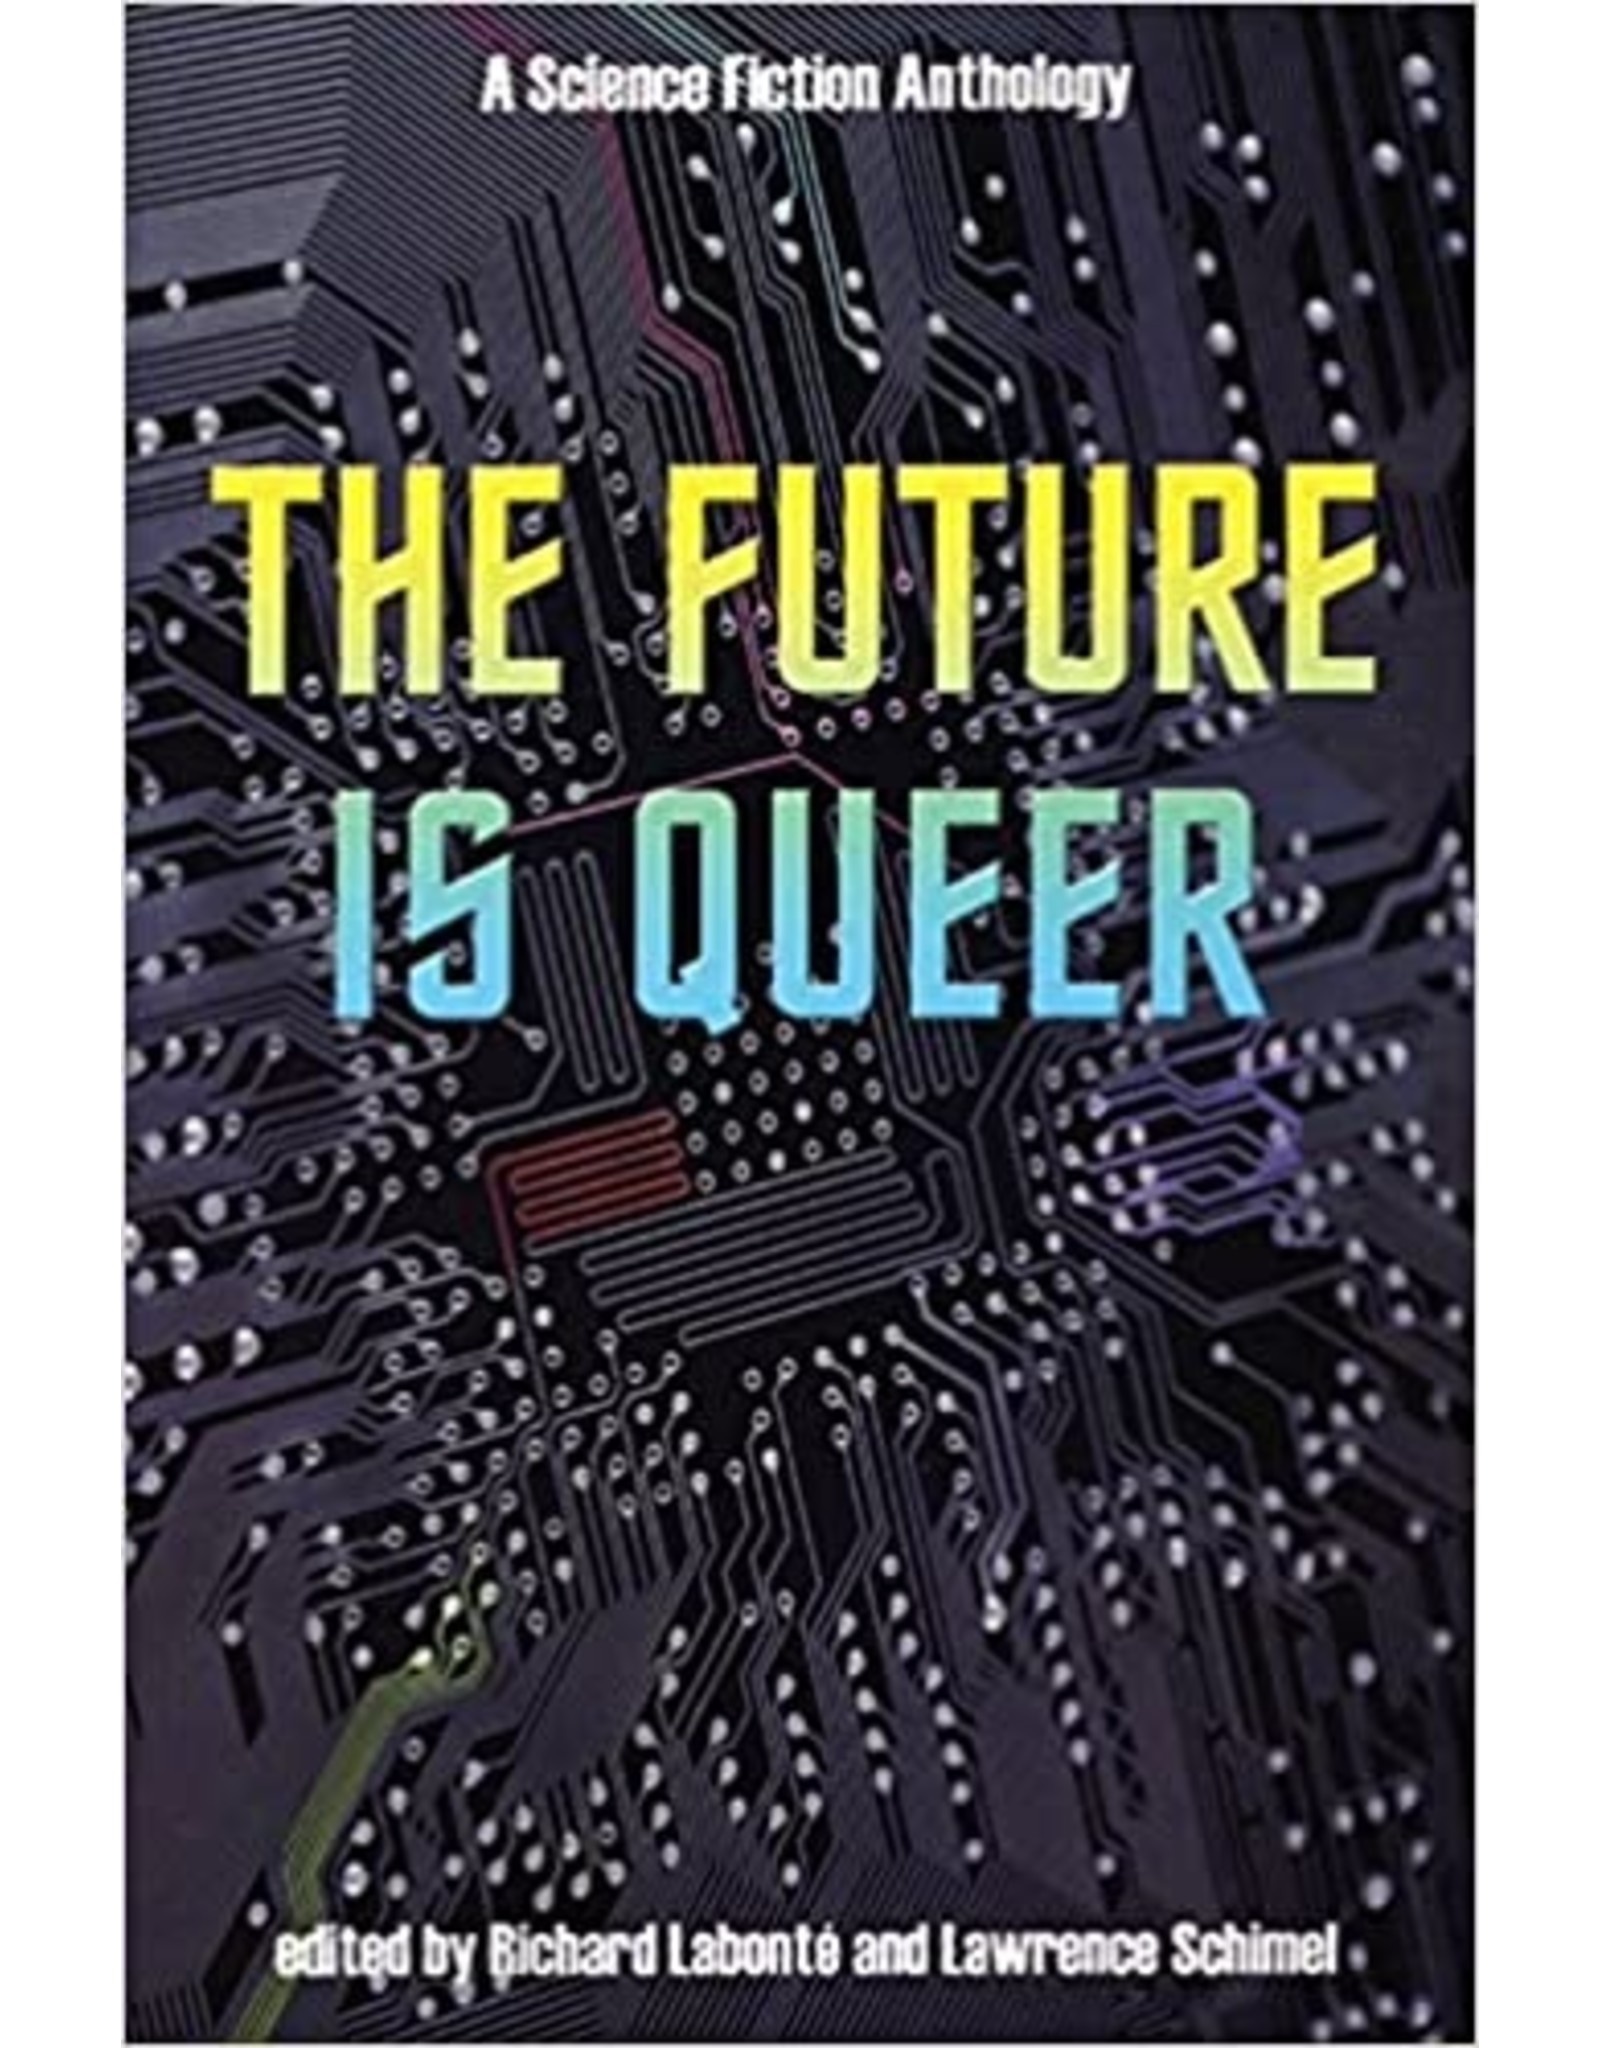 Literature The Future is Queer: A Science Fiction Anthology